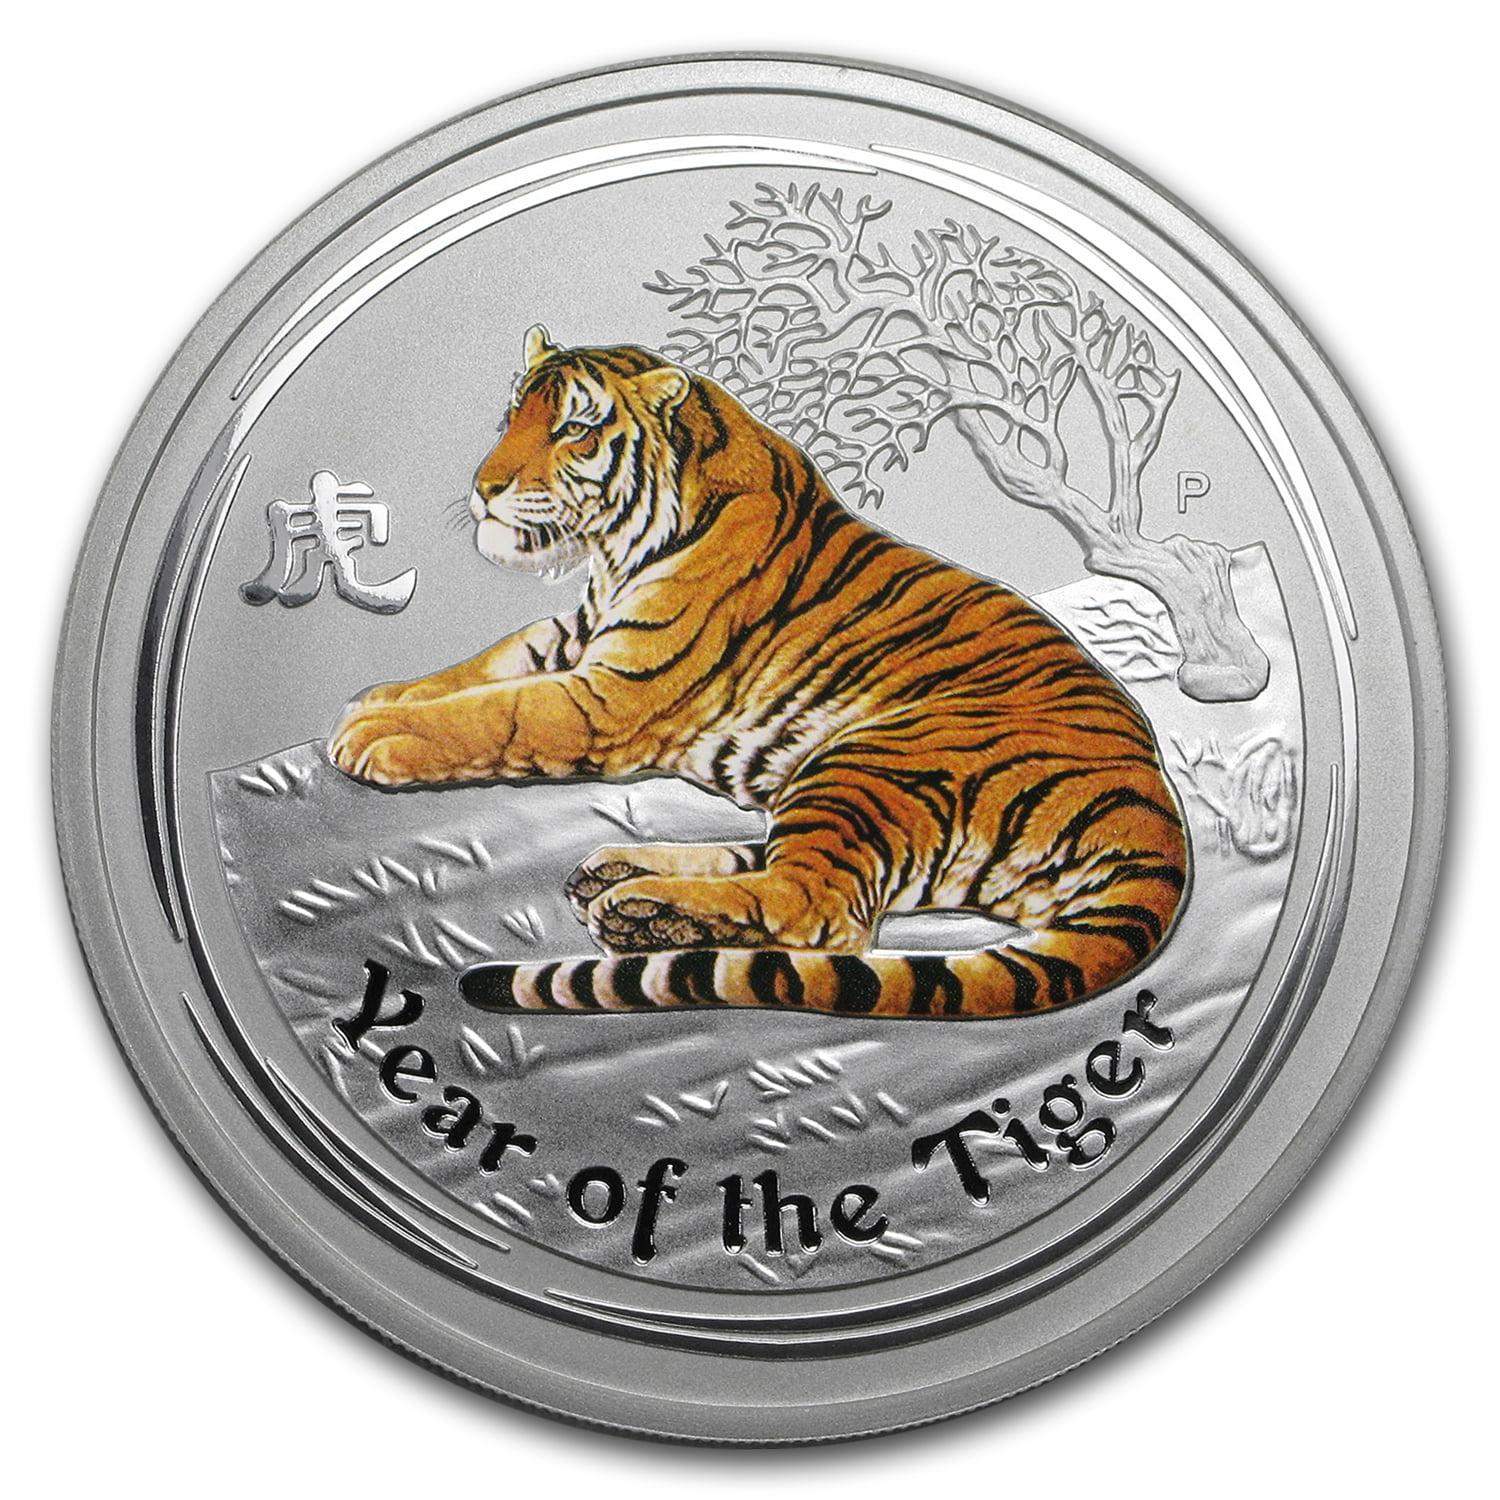 Luckly Chinese 2010 Lunar Zodiac Year of the Tiger Silver Plated Coin 